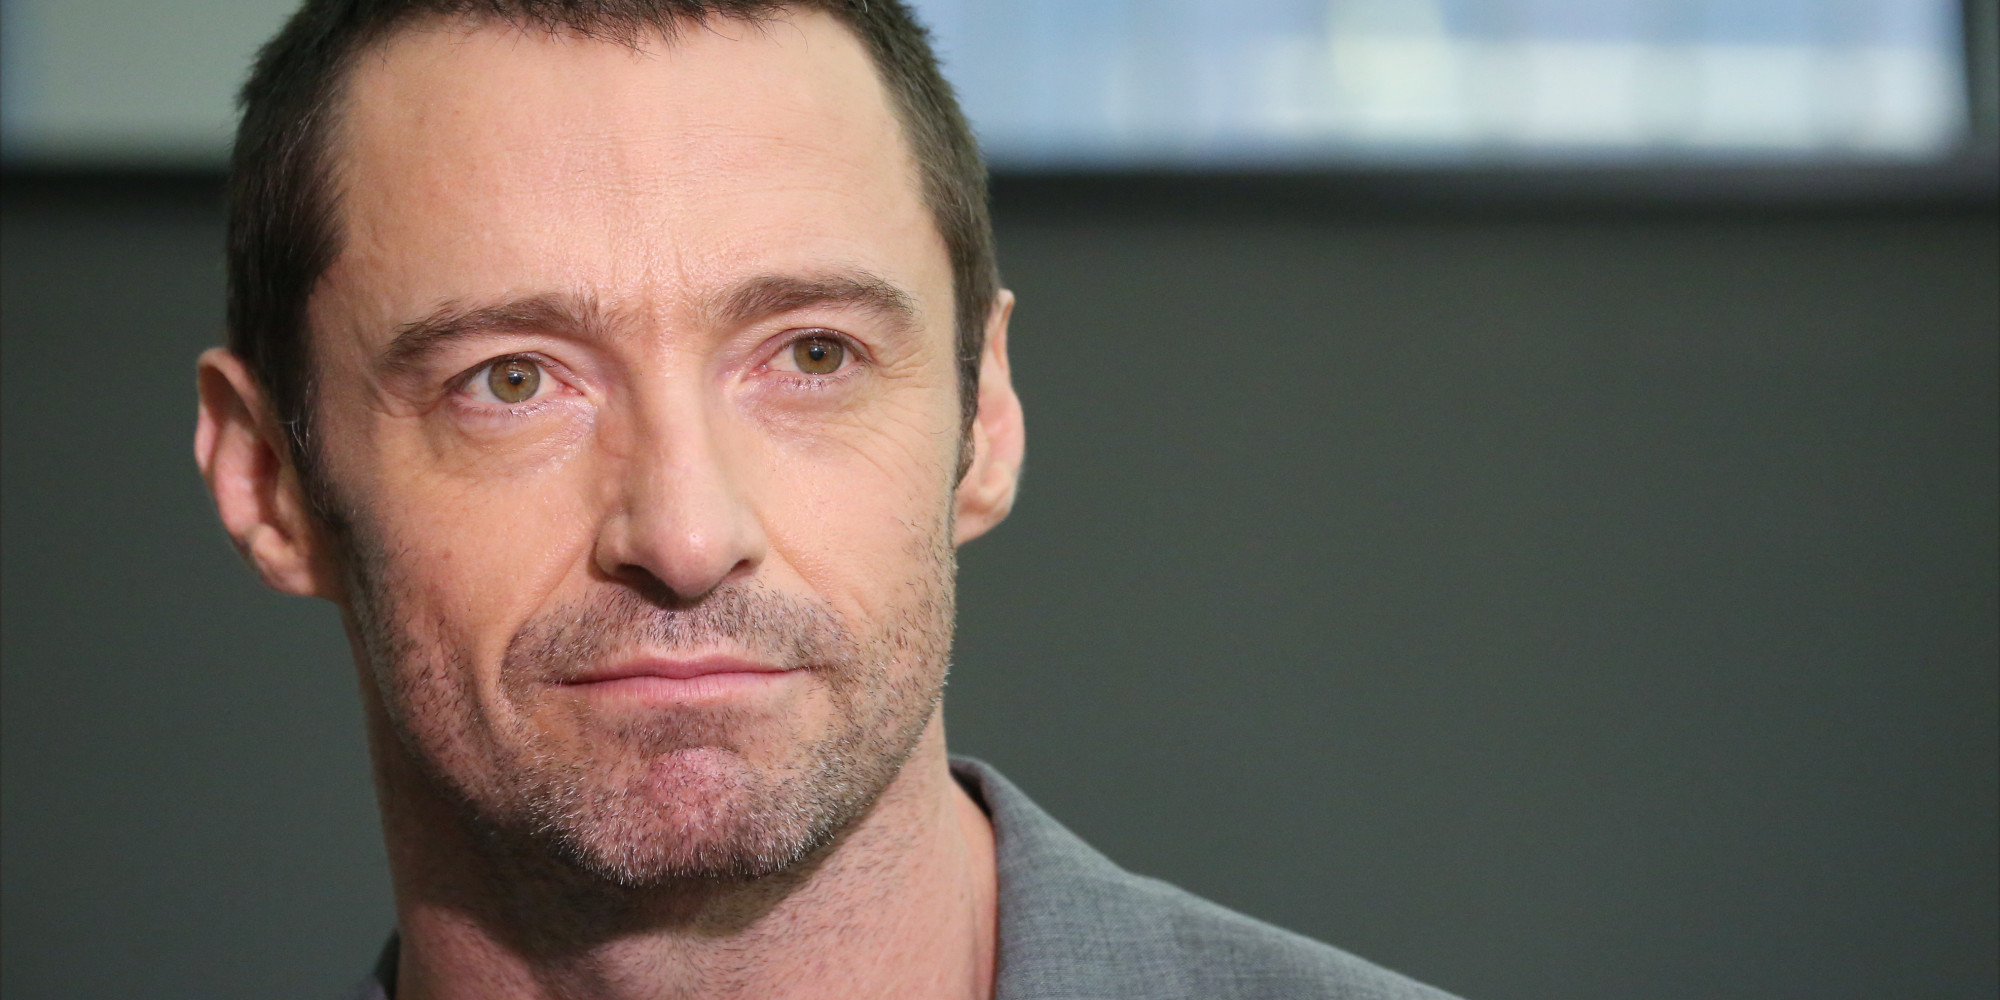 Hugh Jackman : Hugh Jackman's big announcement for his Aussie fans - SYN ... : Despite the recommendation, dougray scott was selected to play wolverine, but due to.